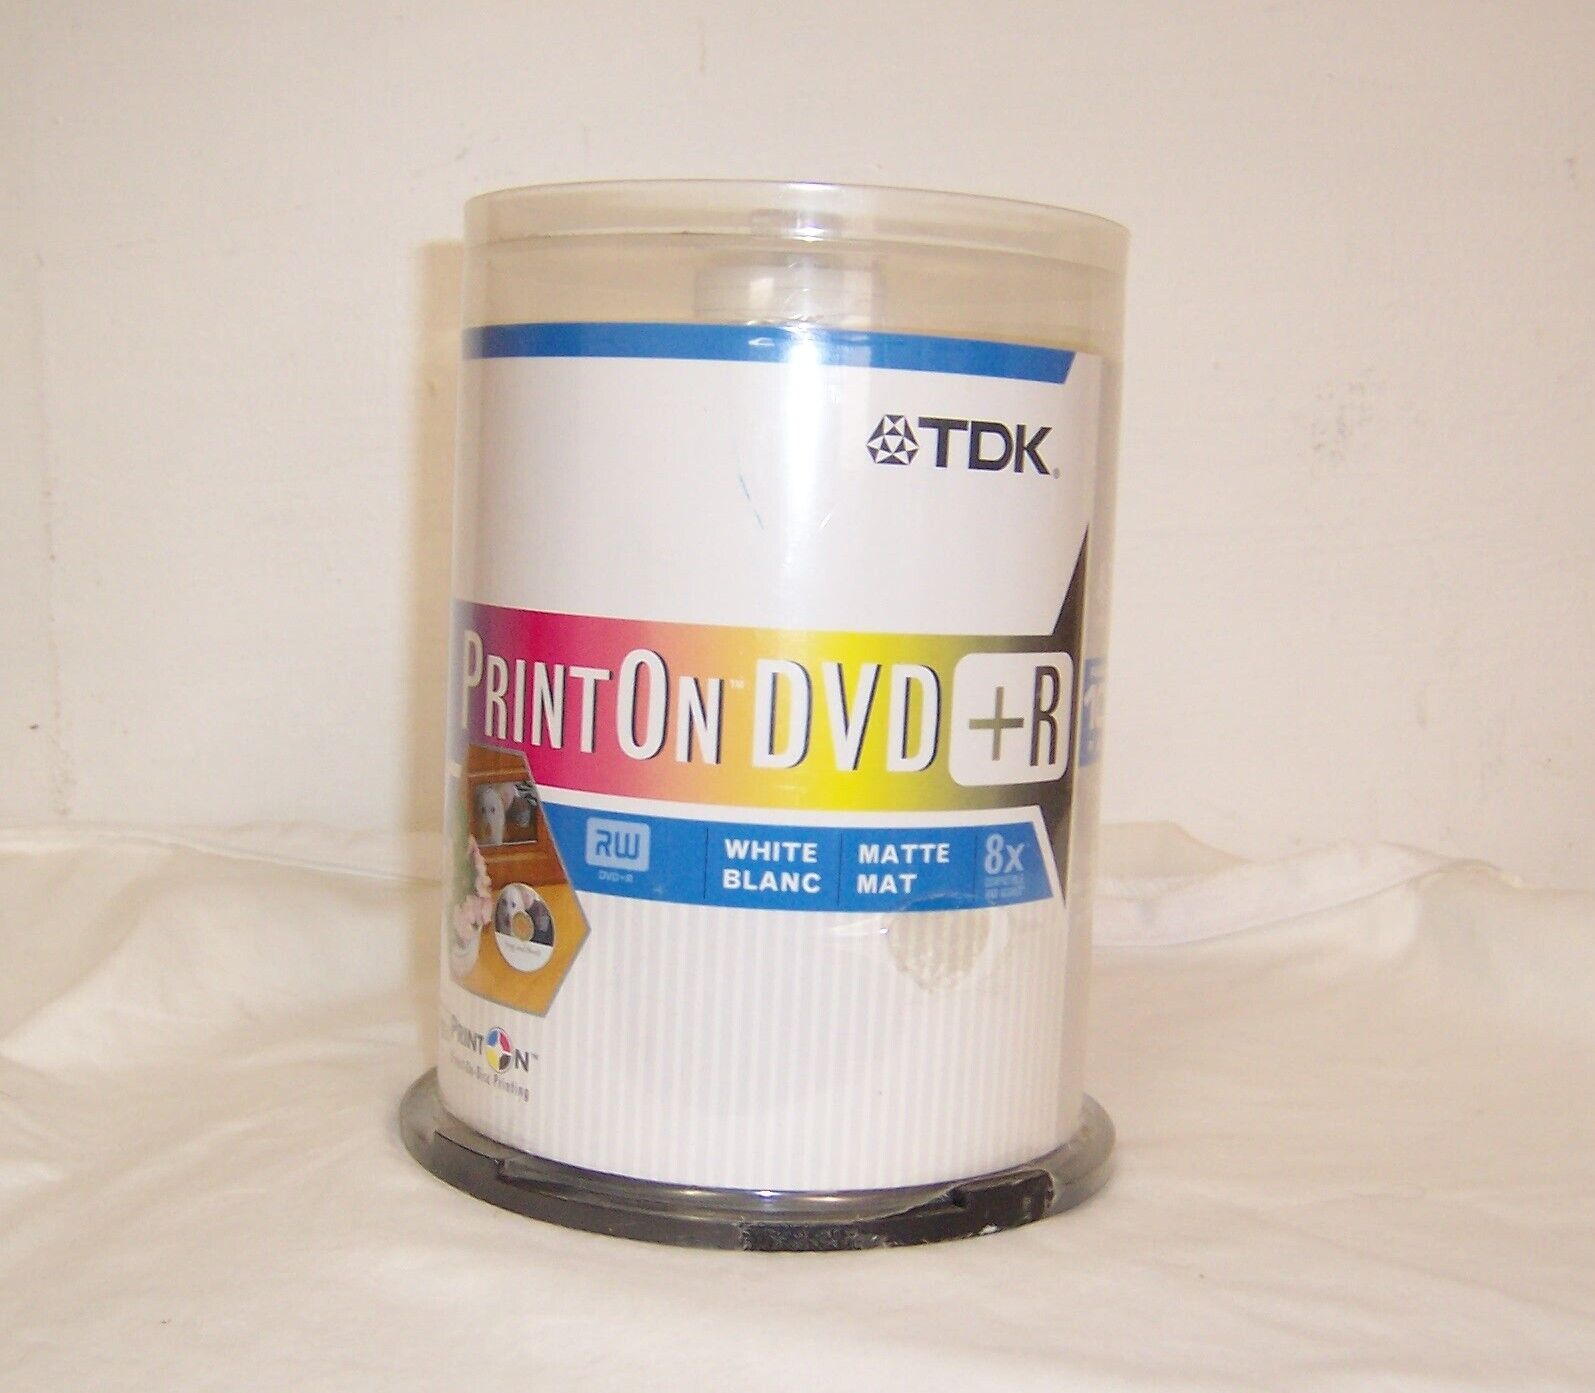 NEW TDK PRINT ON DVD + R MATTE WHITE 8X 4.7 GB 2 HOUR RECORDABLE DISC 100 PACK